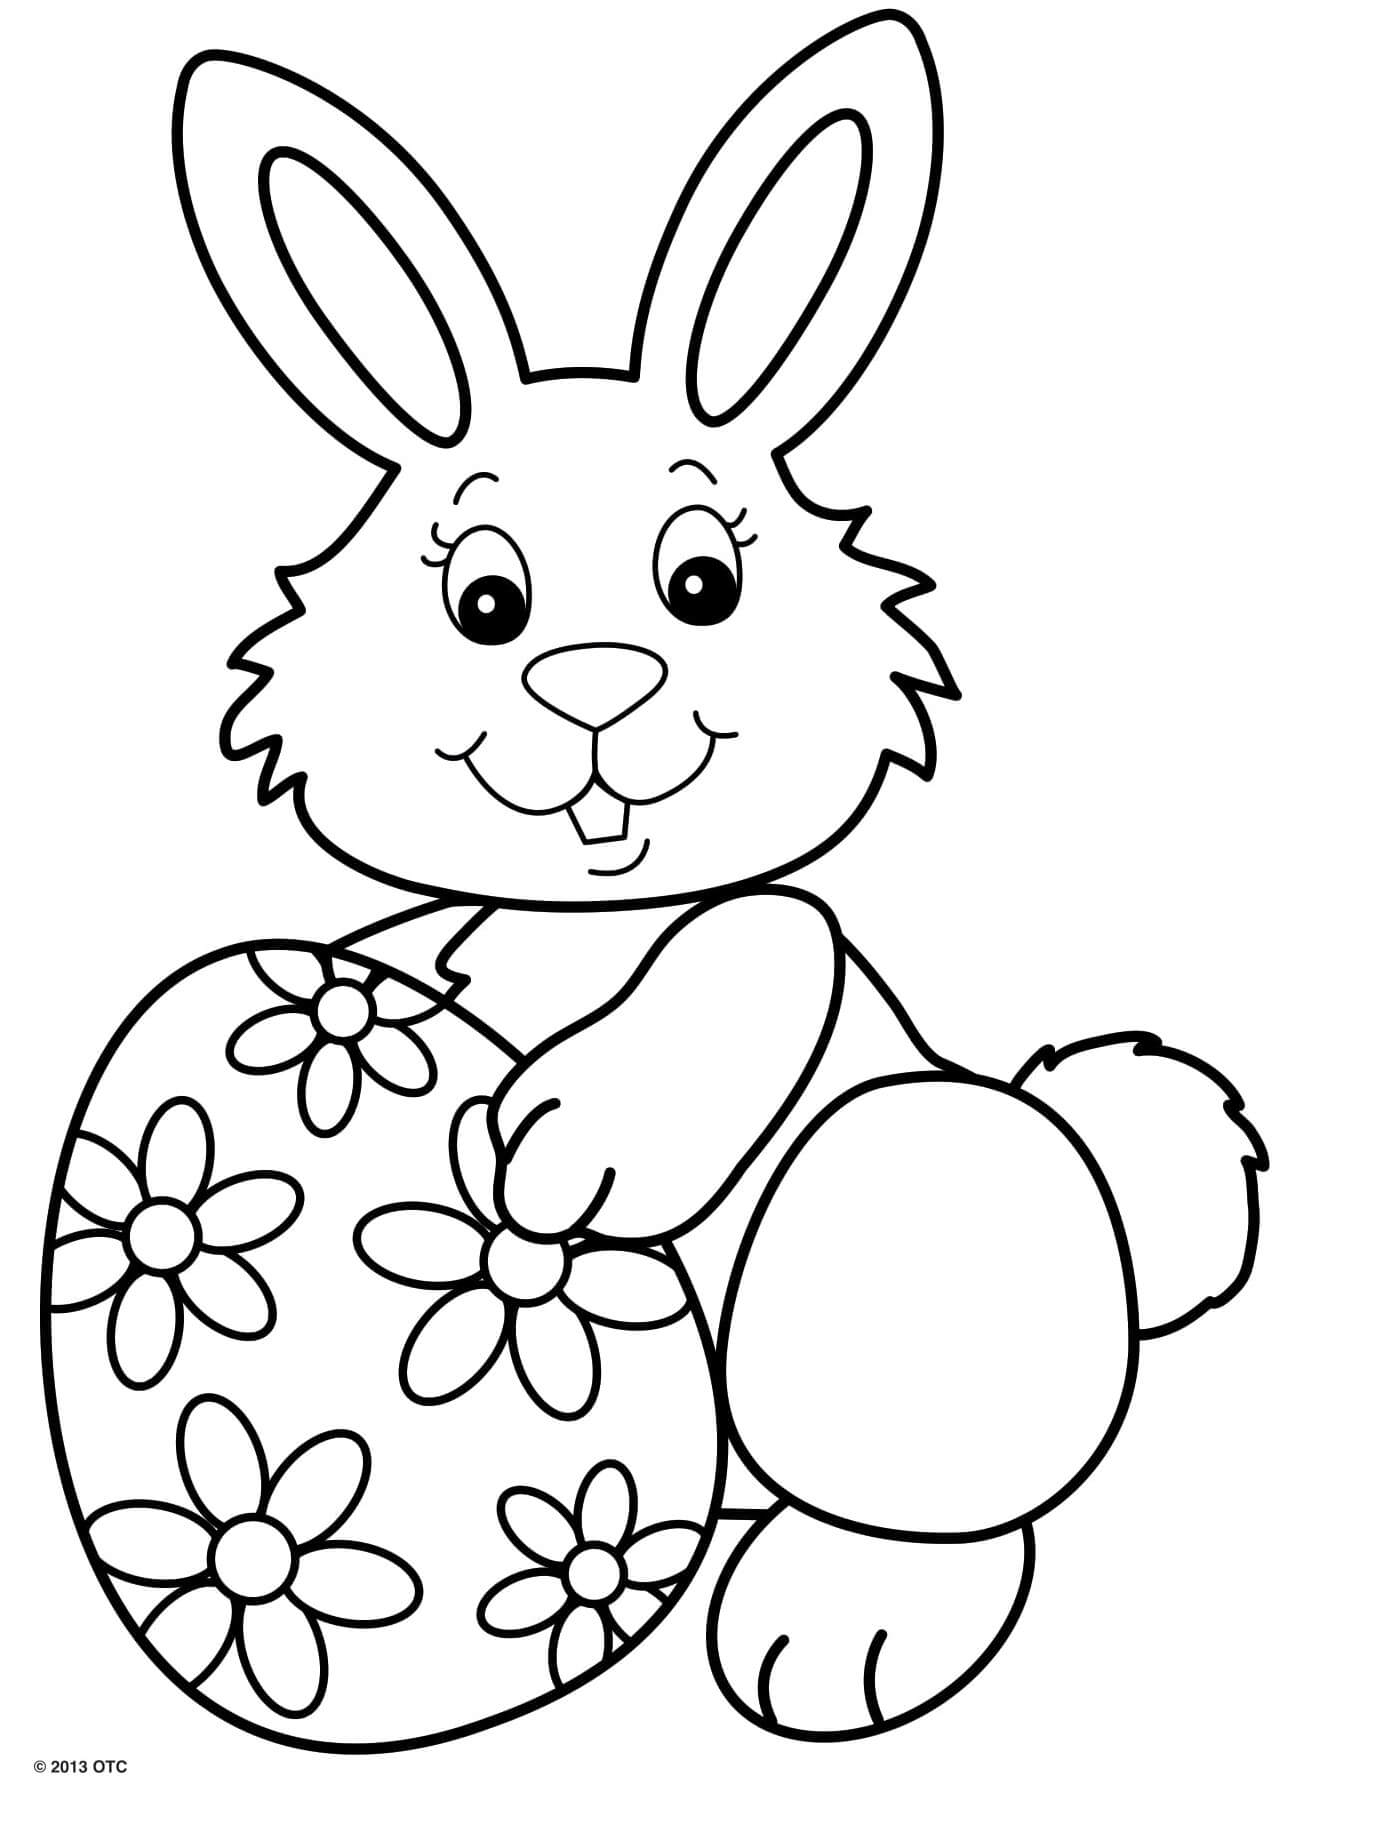 Cute Smile Rabbit With One Egg Flower Pattern Coloring Page